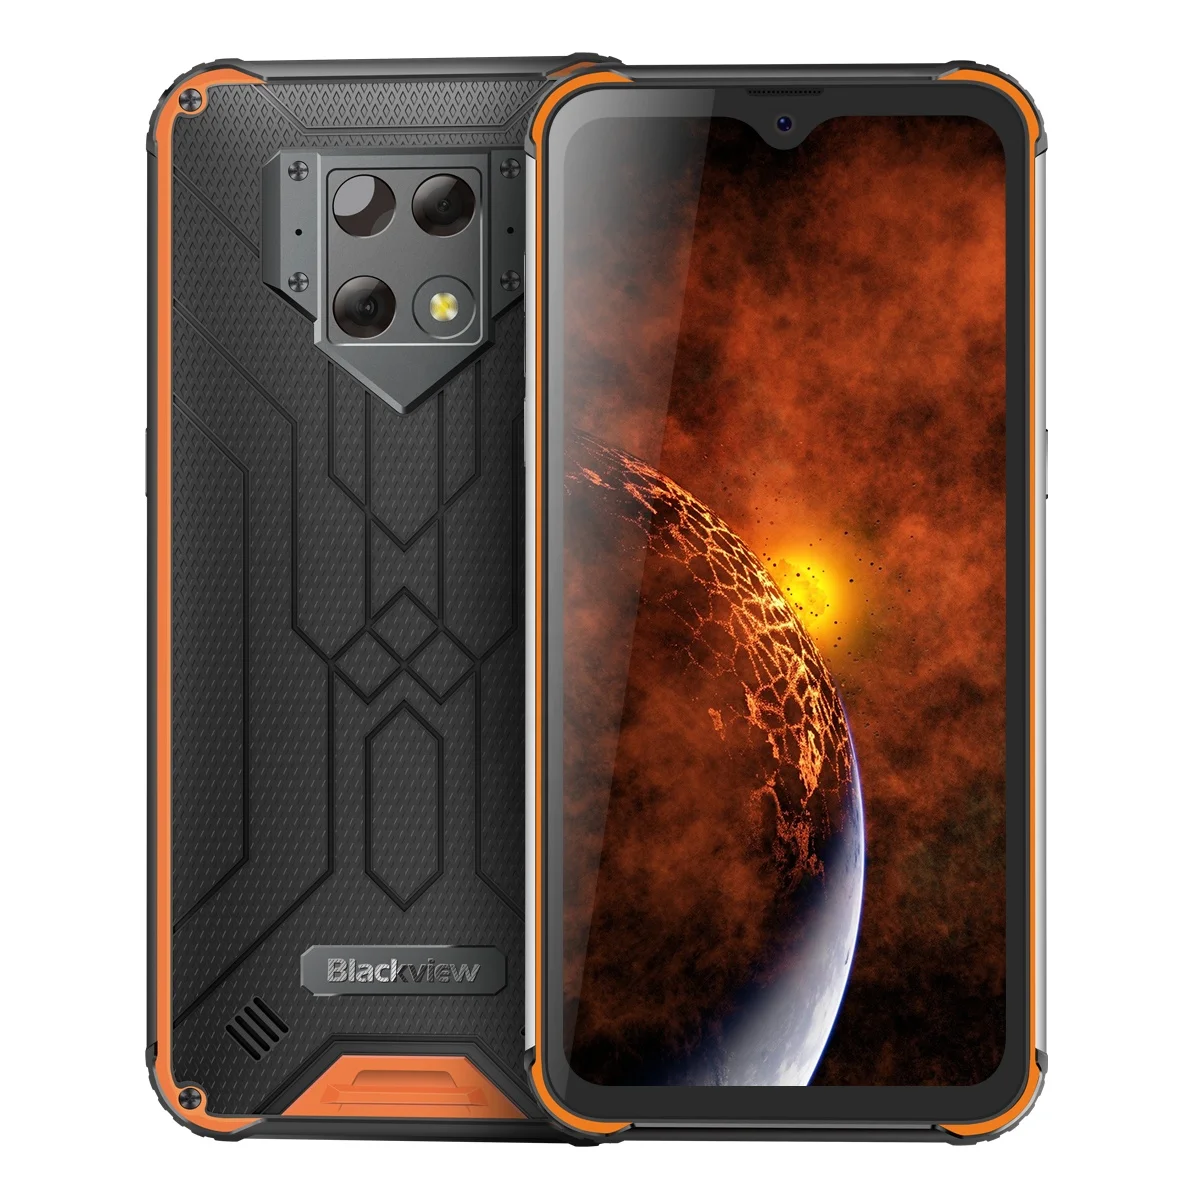 

Blackview BV9800 Pro Helio P70 Android 9.0 6580mAh 6GB+128GB 48MP Waterproof 4G Rugged Smartphone Thermal Imaging Mobile Phone